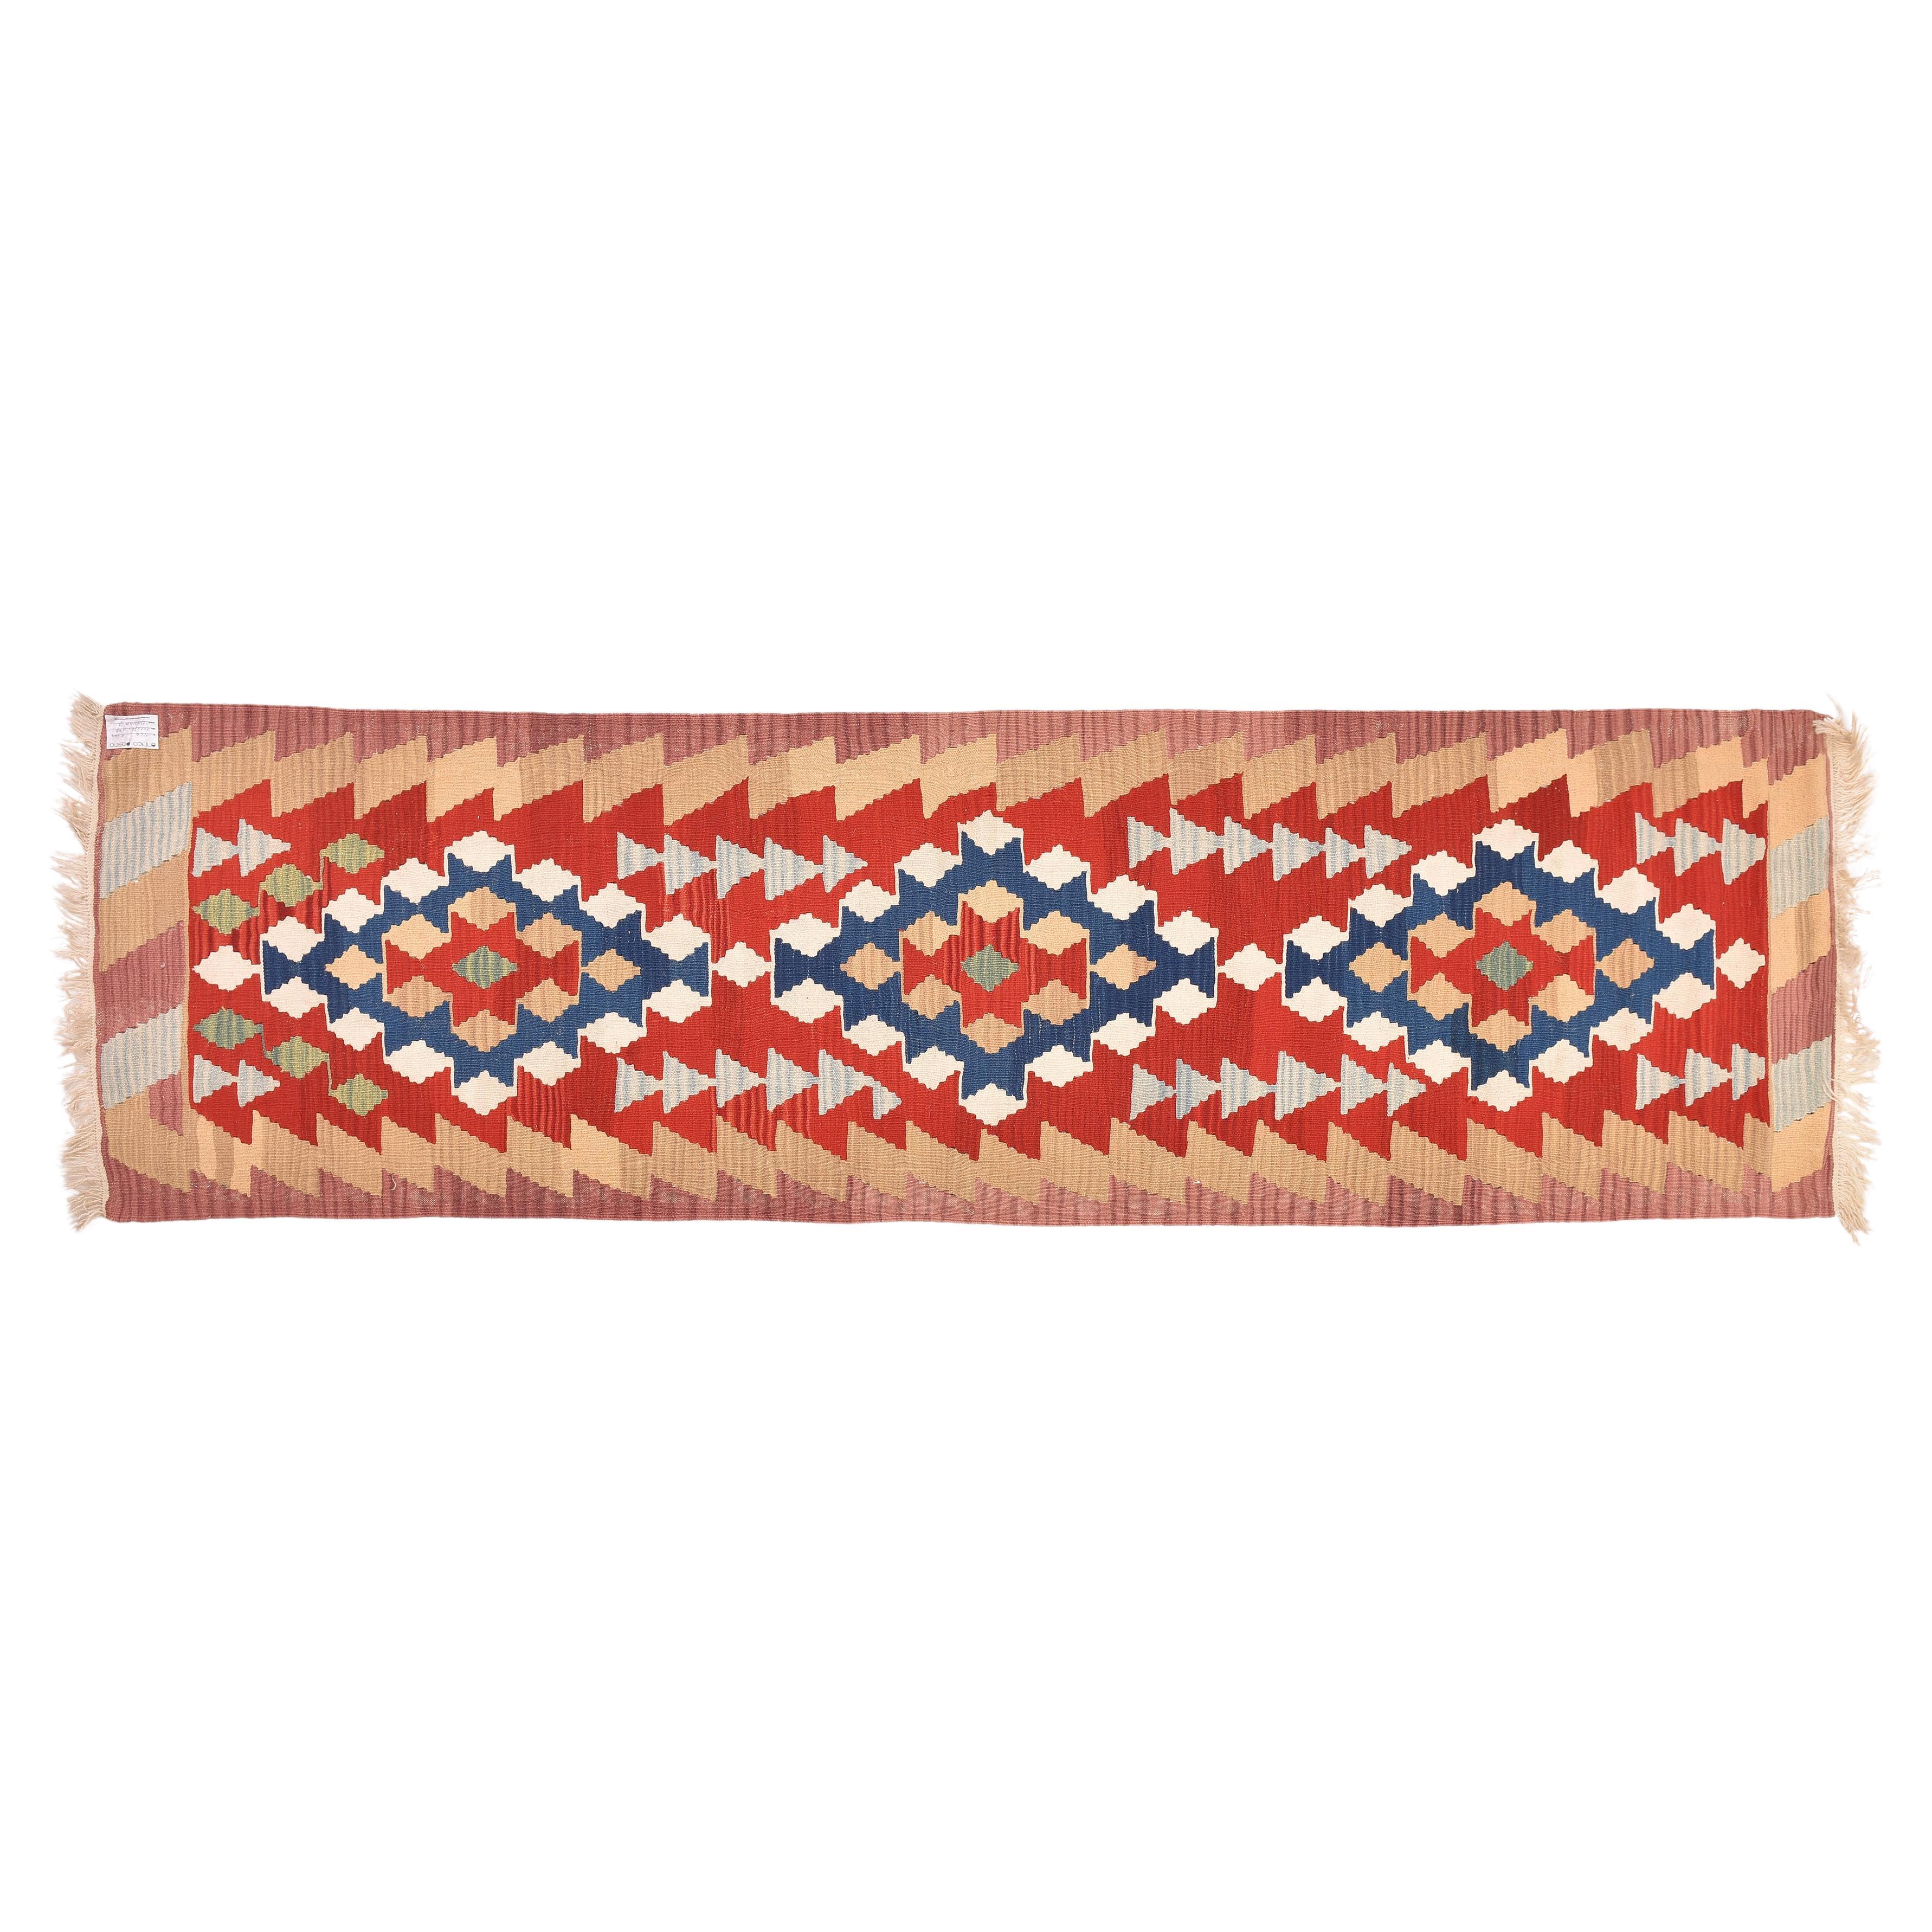 nr. 1144 -  Beautiful Turkish kilim runner, with cheerful colors (red, white, blue) in three geometric medallions, enclosed in a pink and camel border.  Robust and pleasant, with a good price.